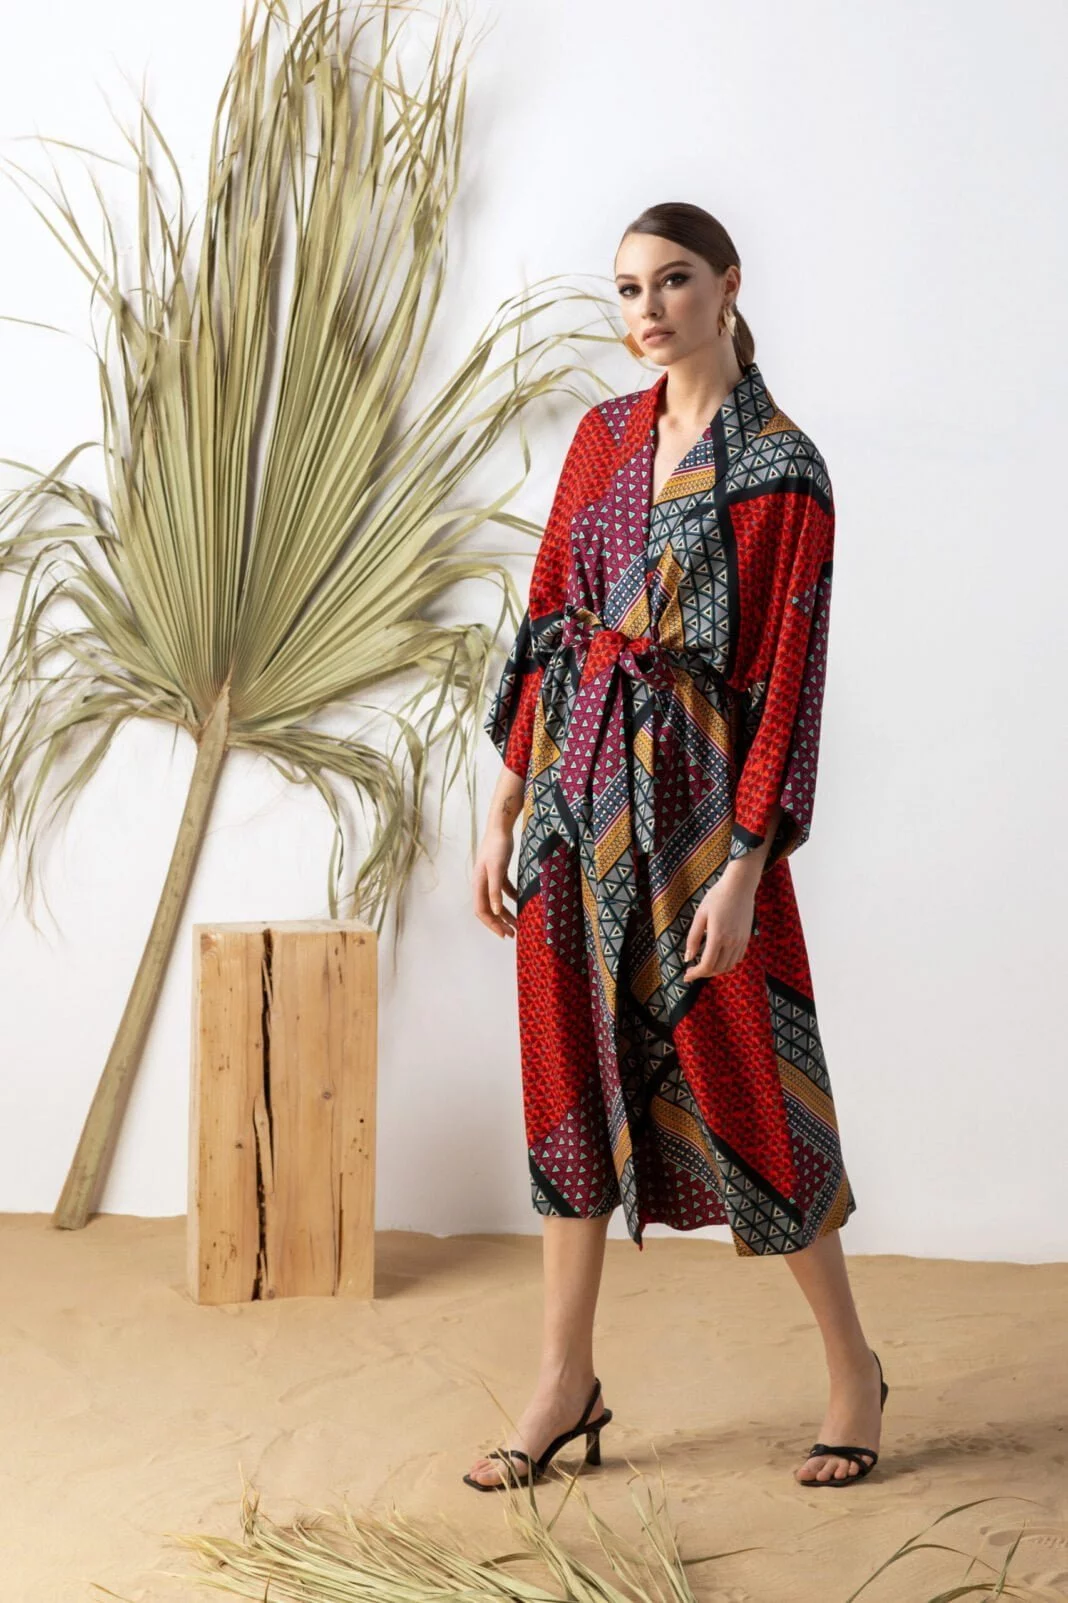 Red Mid-Length Flowy Kimono Dress - Effortless Elegance for Any Occasion